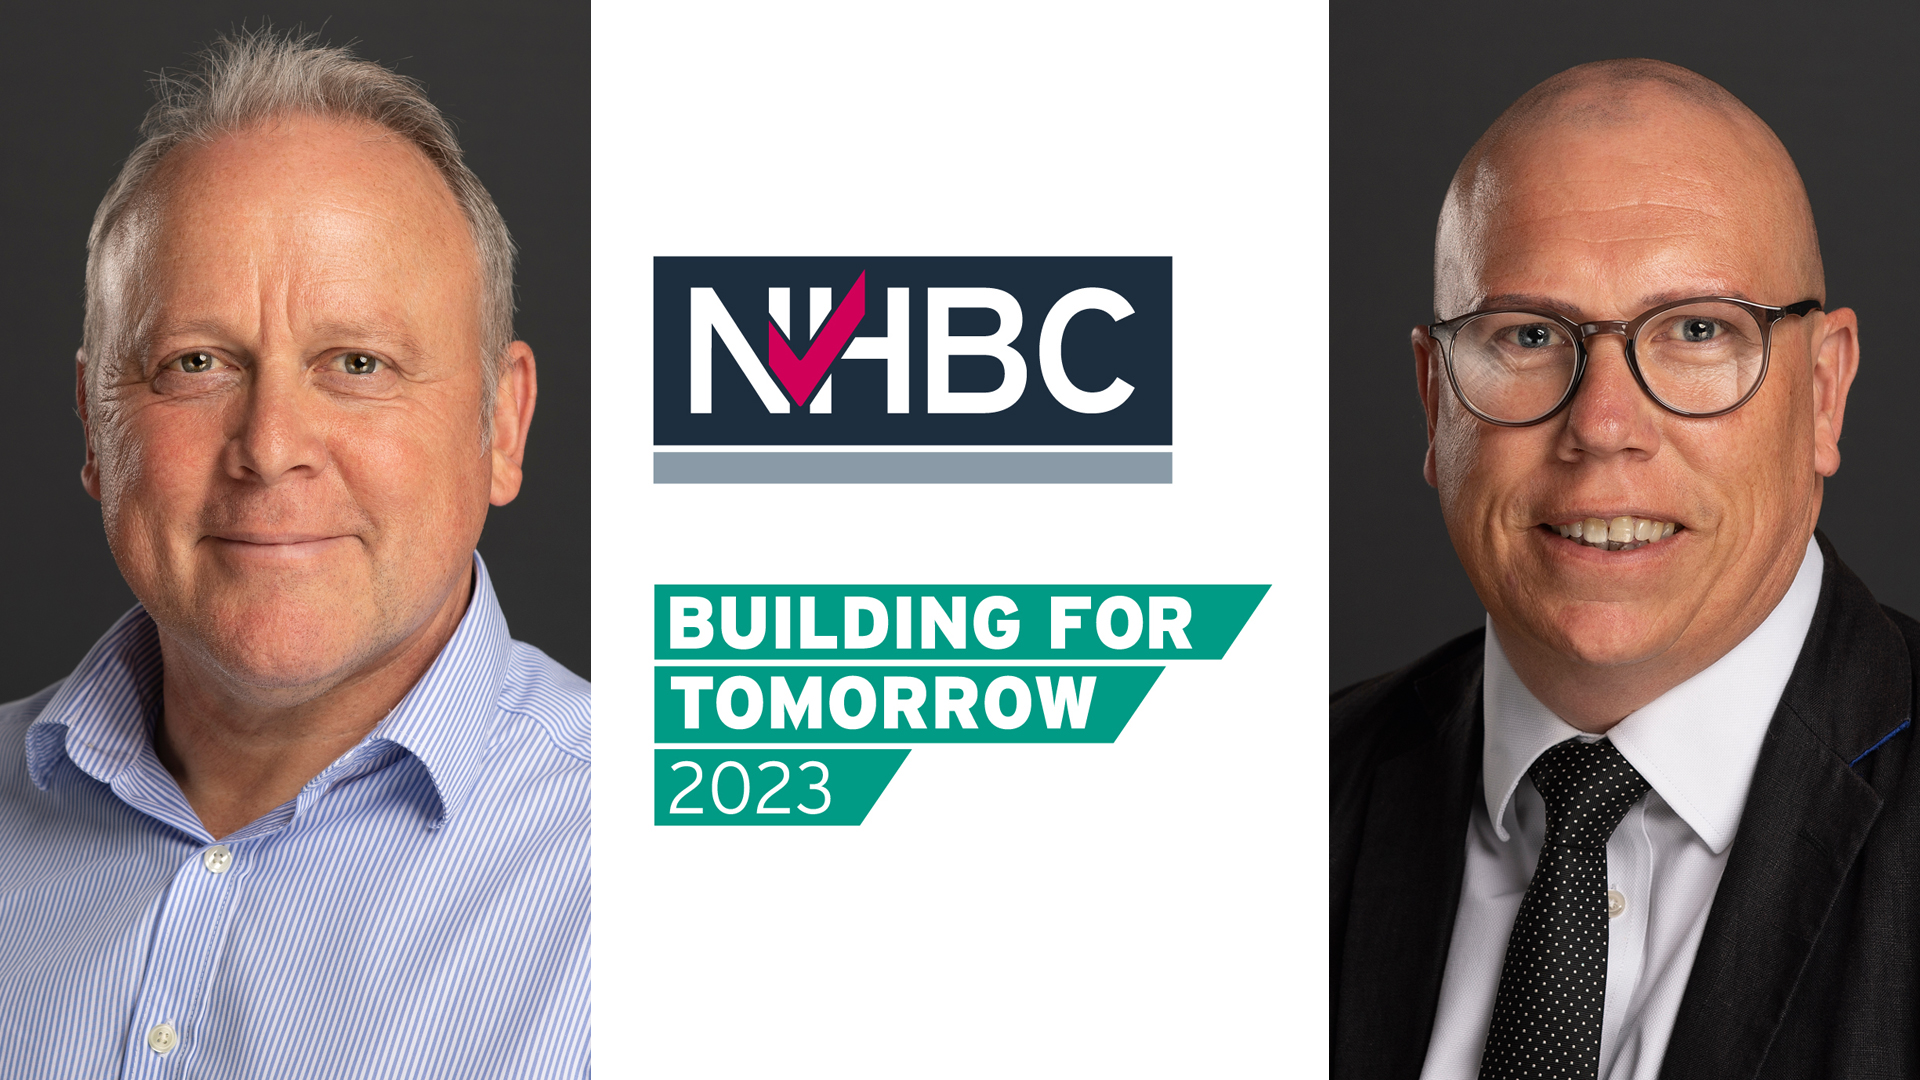 Building for tomorrow 2023